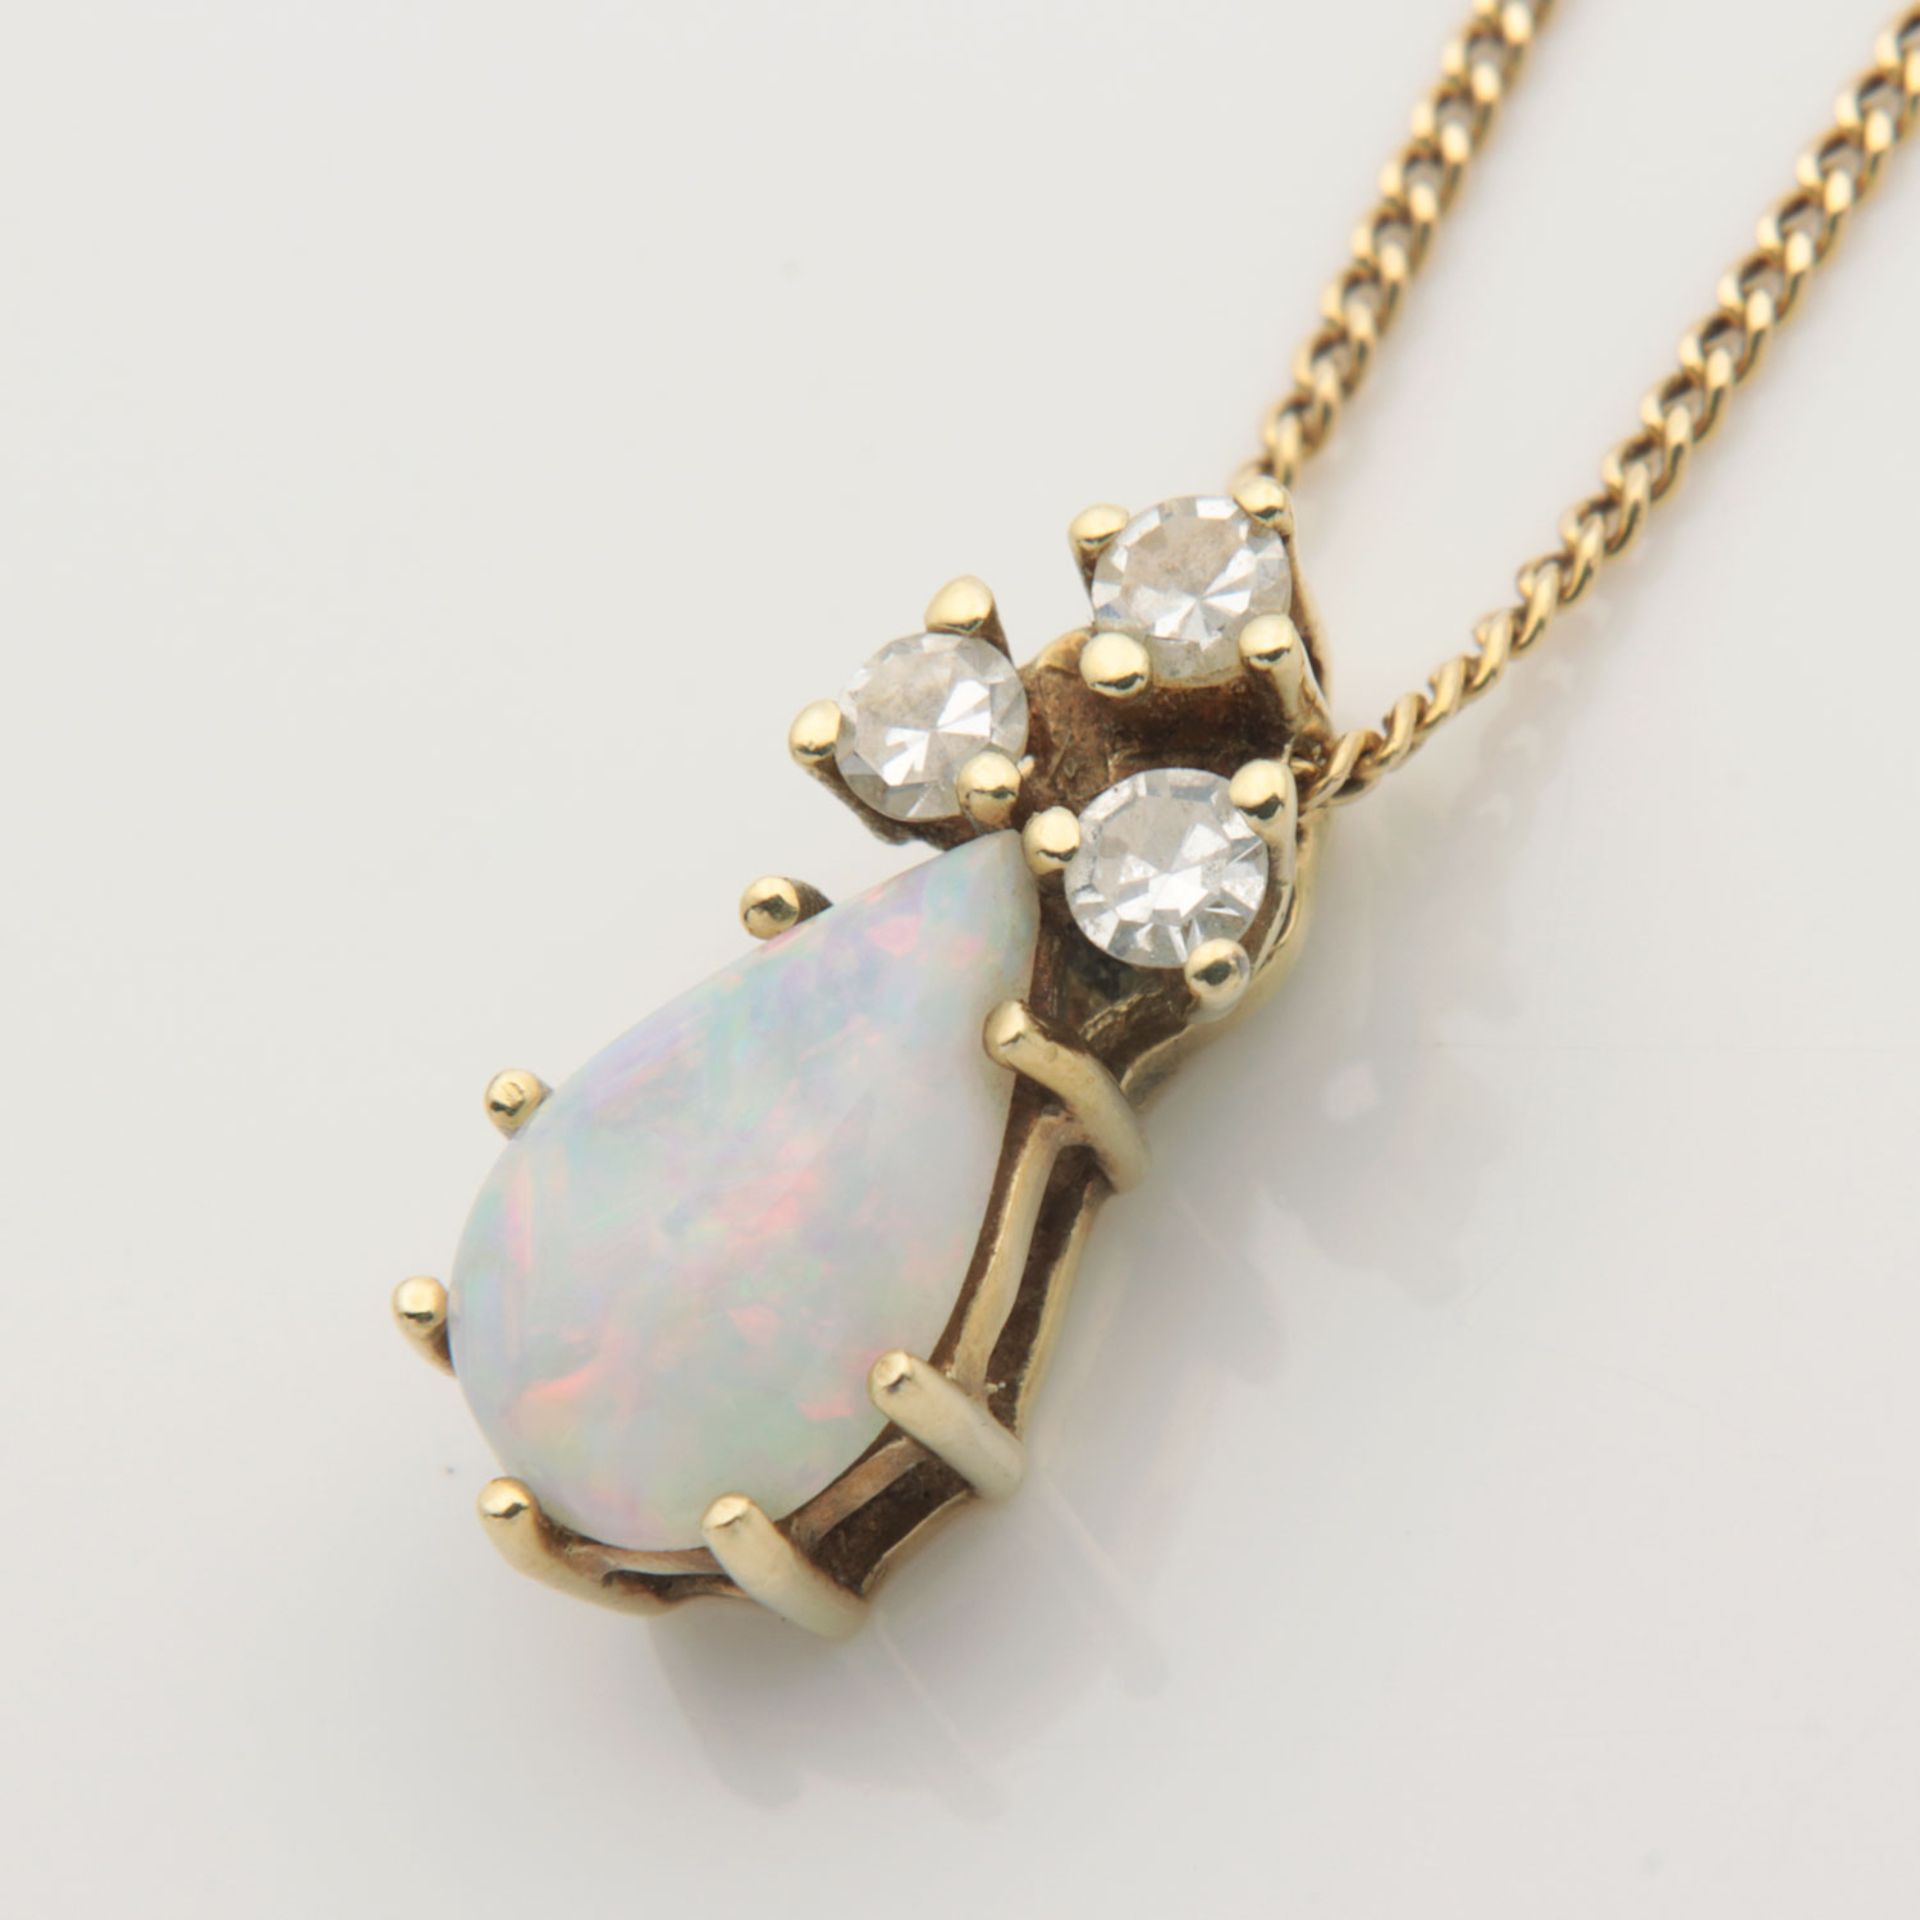 Diamant/Opal - Anhänger - Image 4 of 6